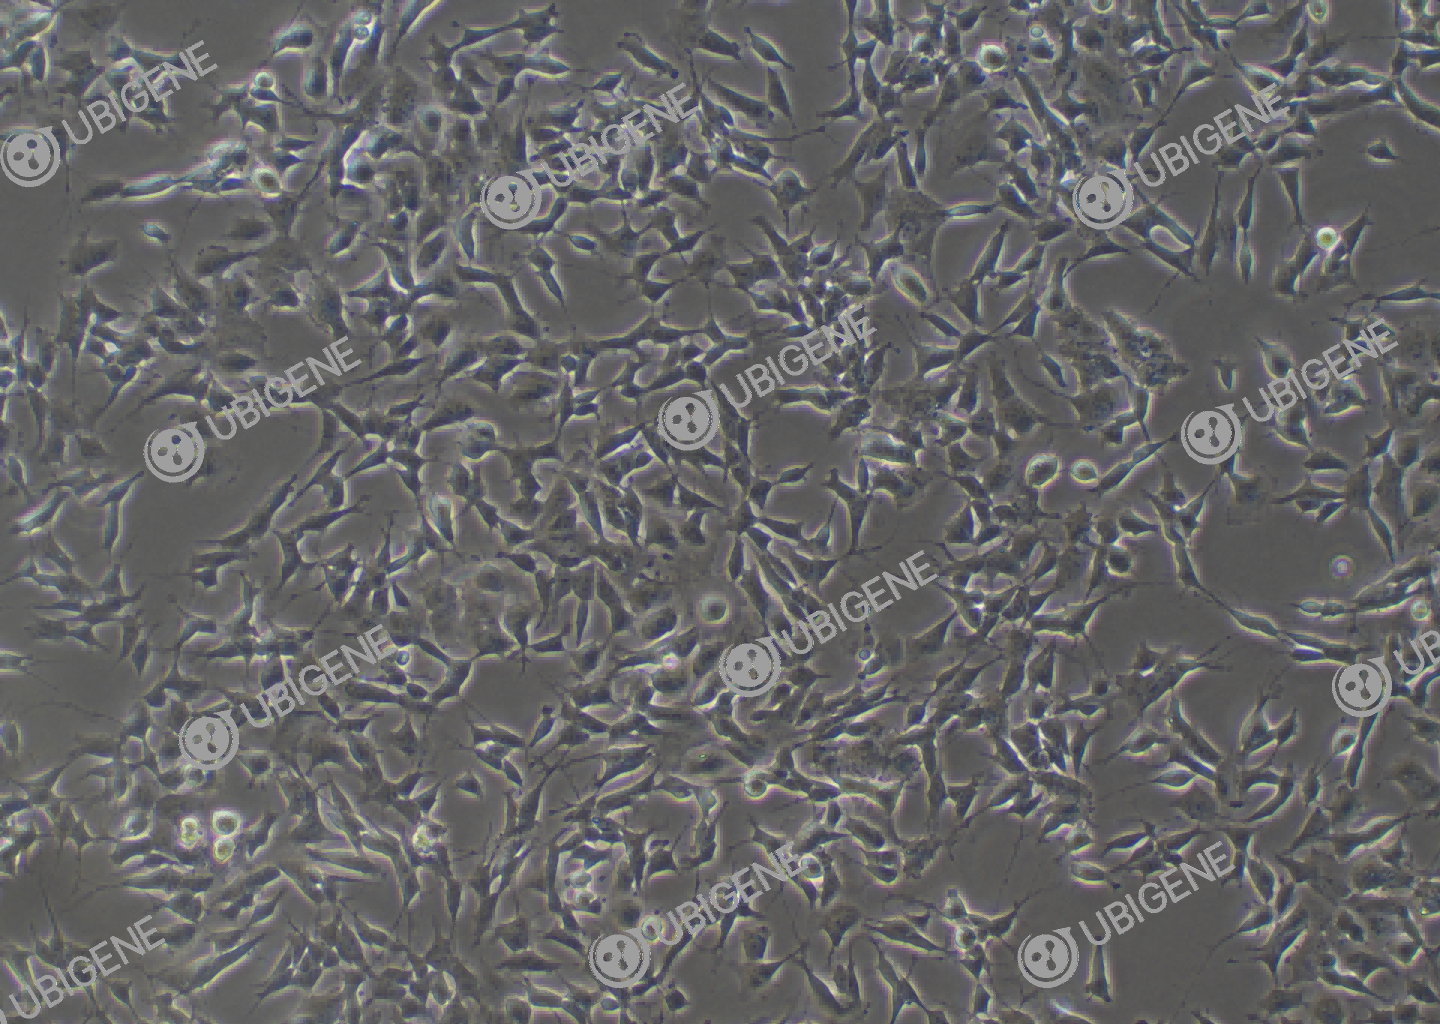 SH-SY5Y cell line Cultured cell morphology